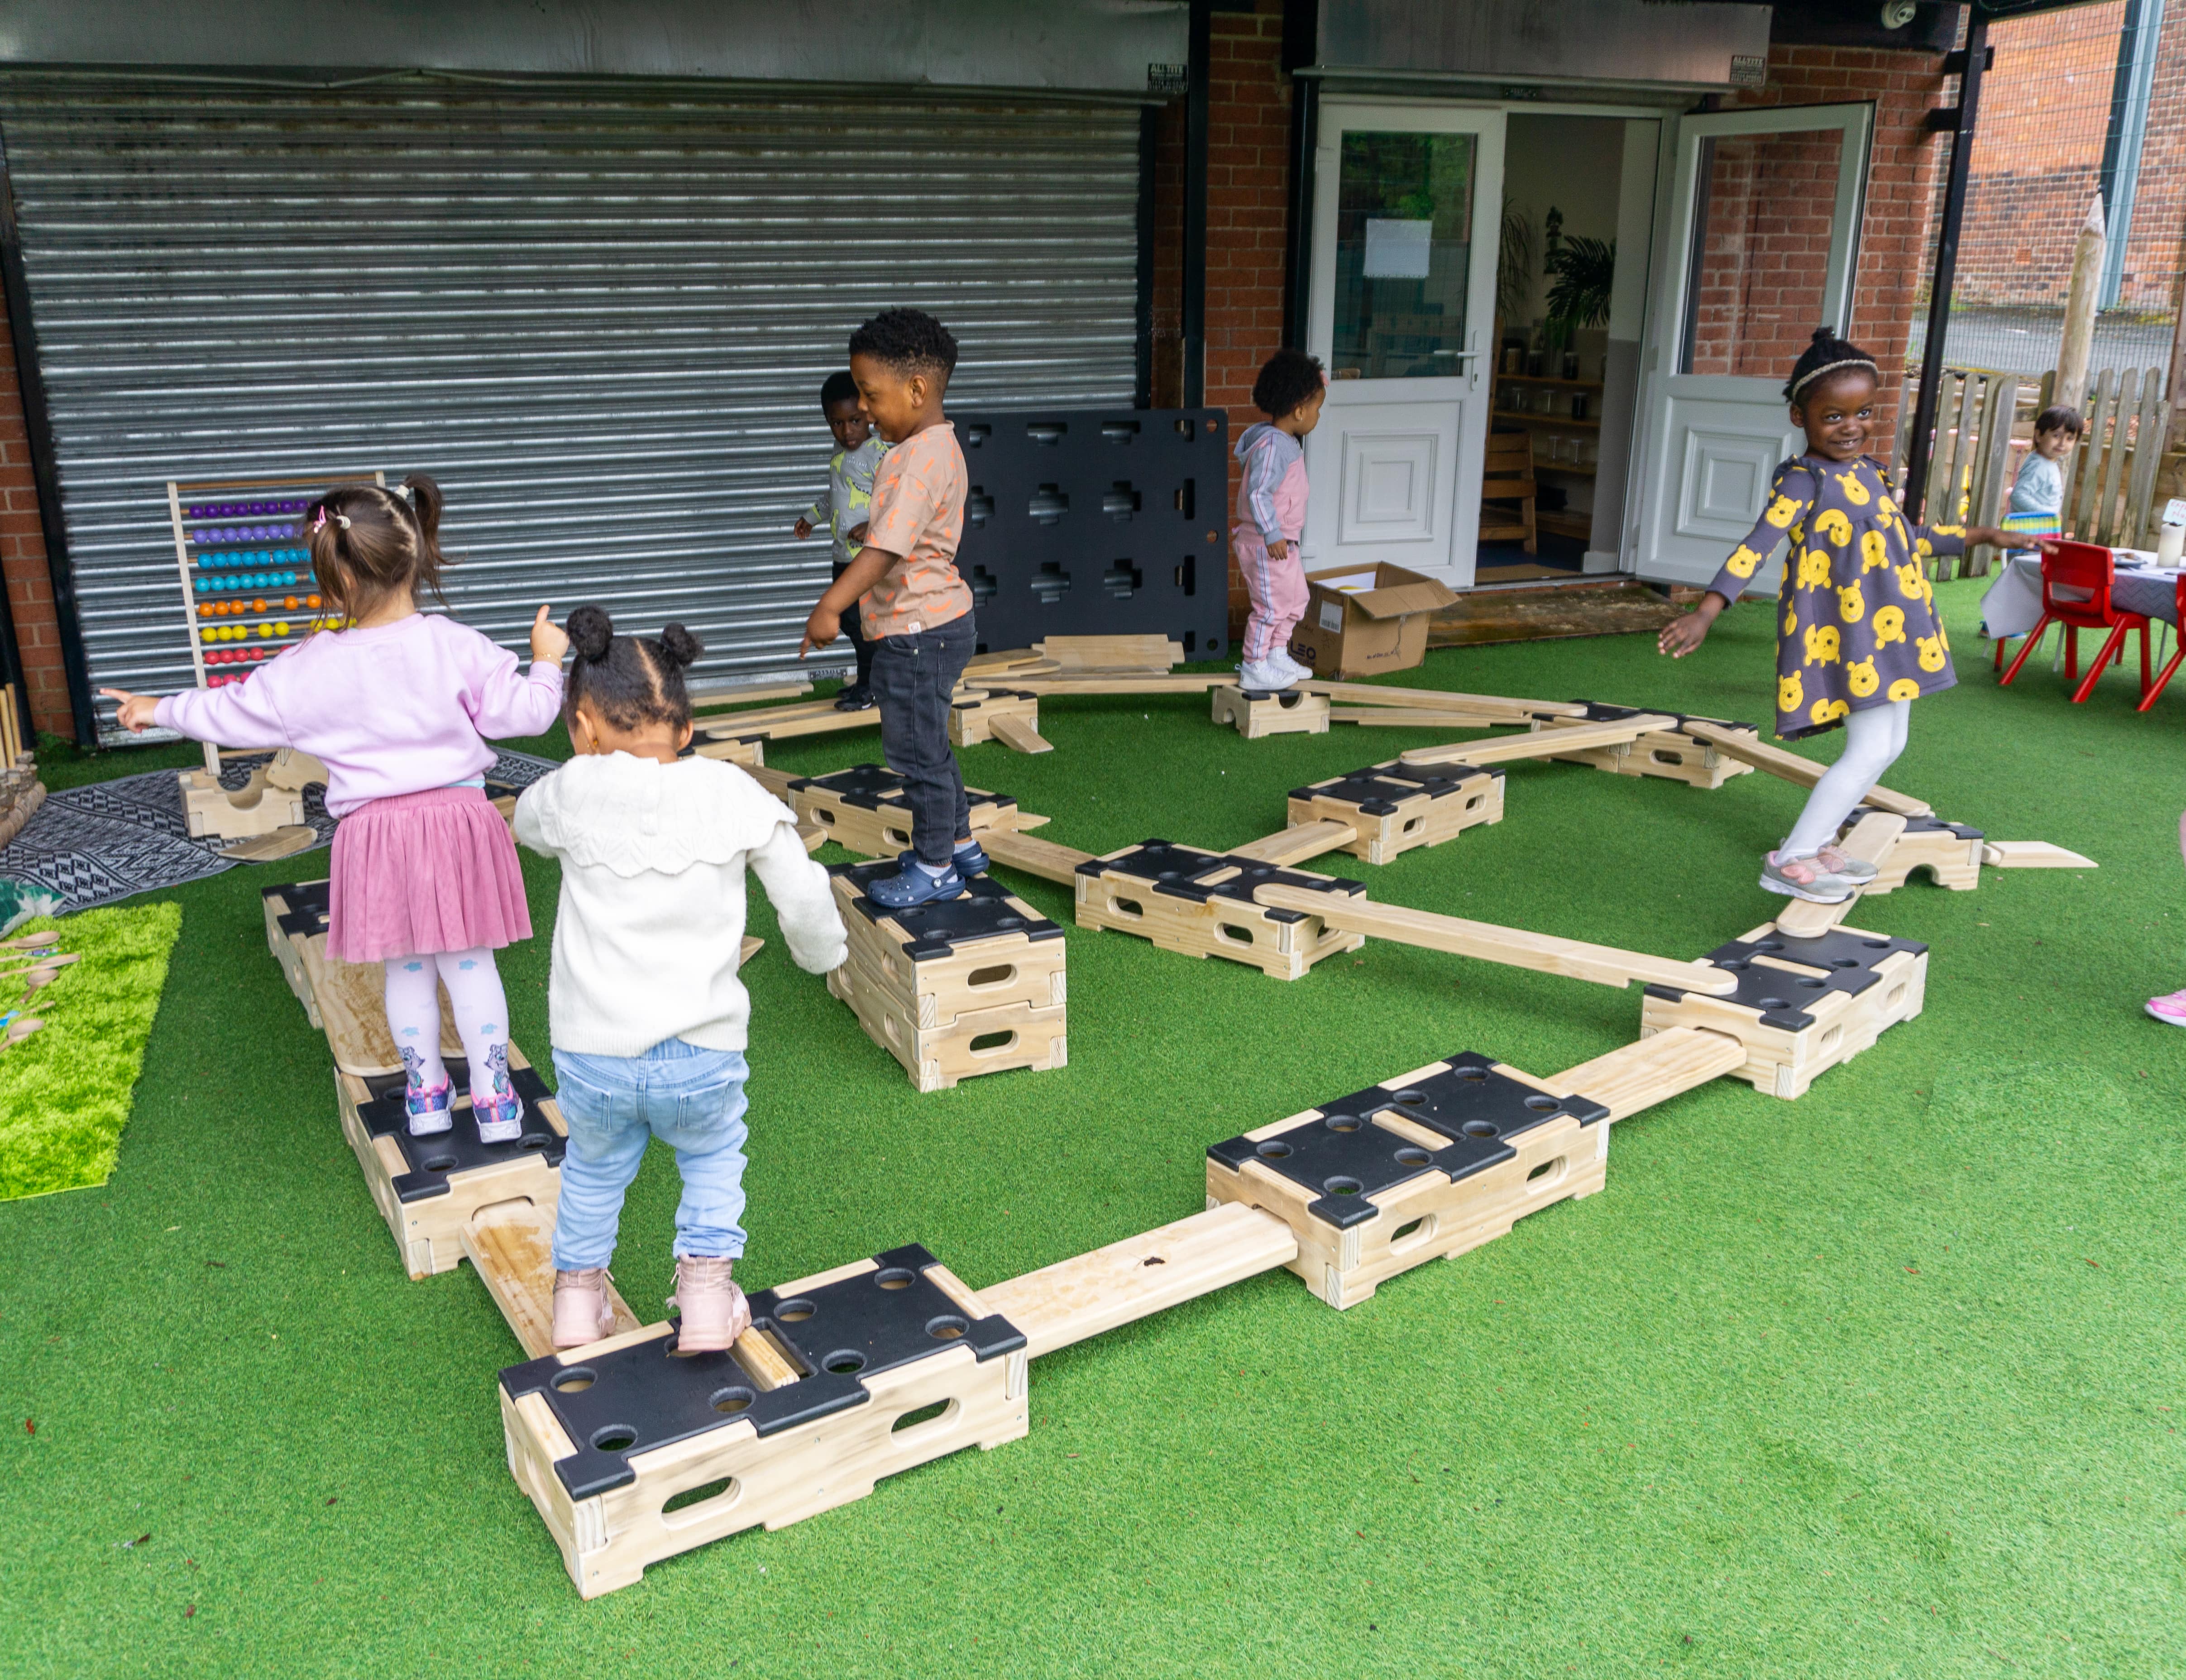 A group of children are completing an obstacle course which has wooden planks connecting to a variety of different wooden blocks. The children are balancing across the planks or standing on a wooden block whilst the surrounding area is covered in artificial grass surfacing.